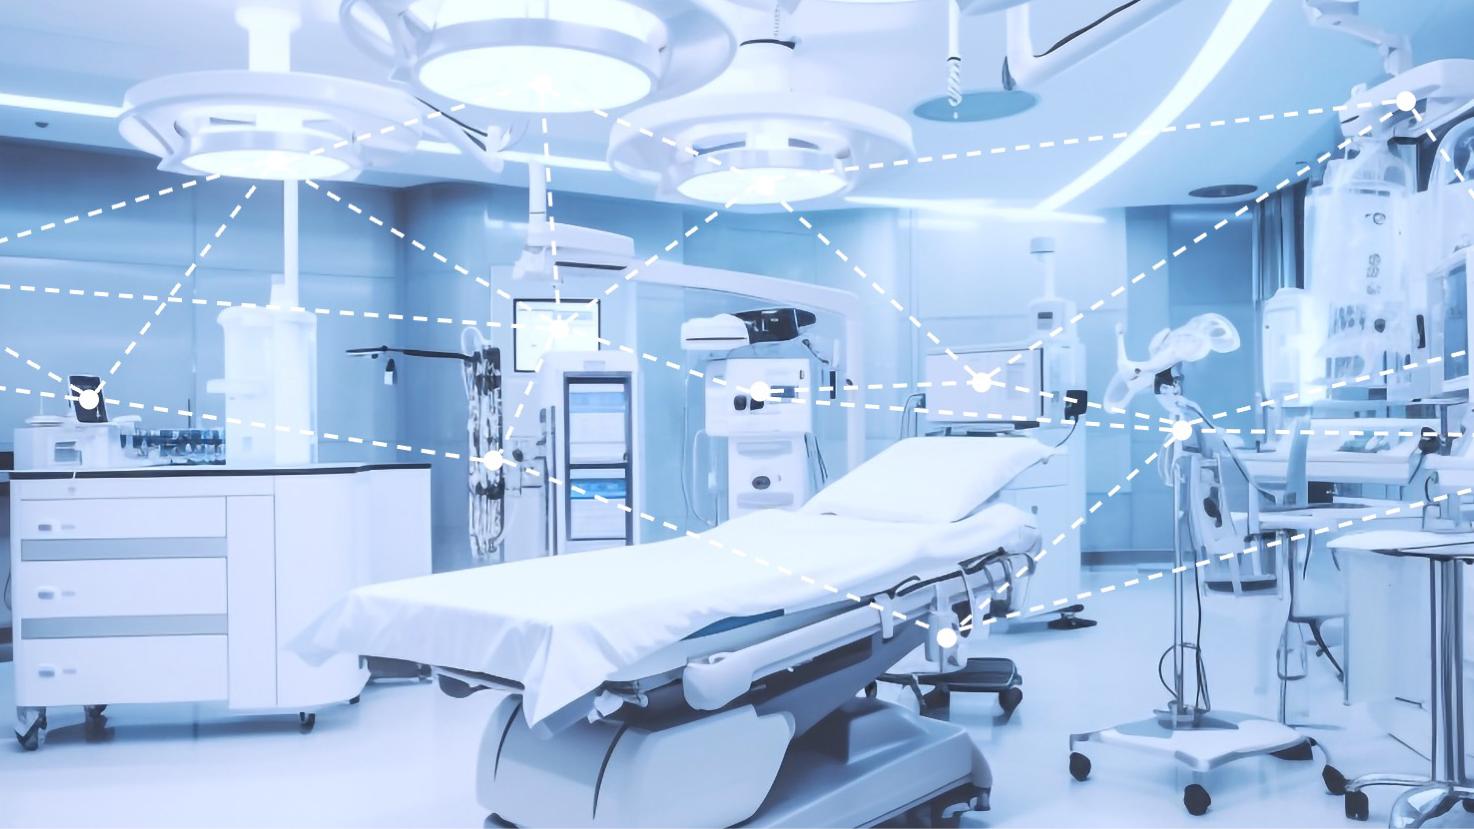 Workshop: New Opportunities for Medical Device Connectivity